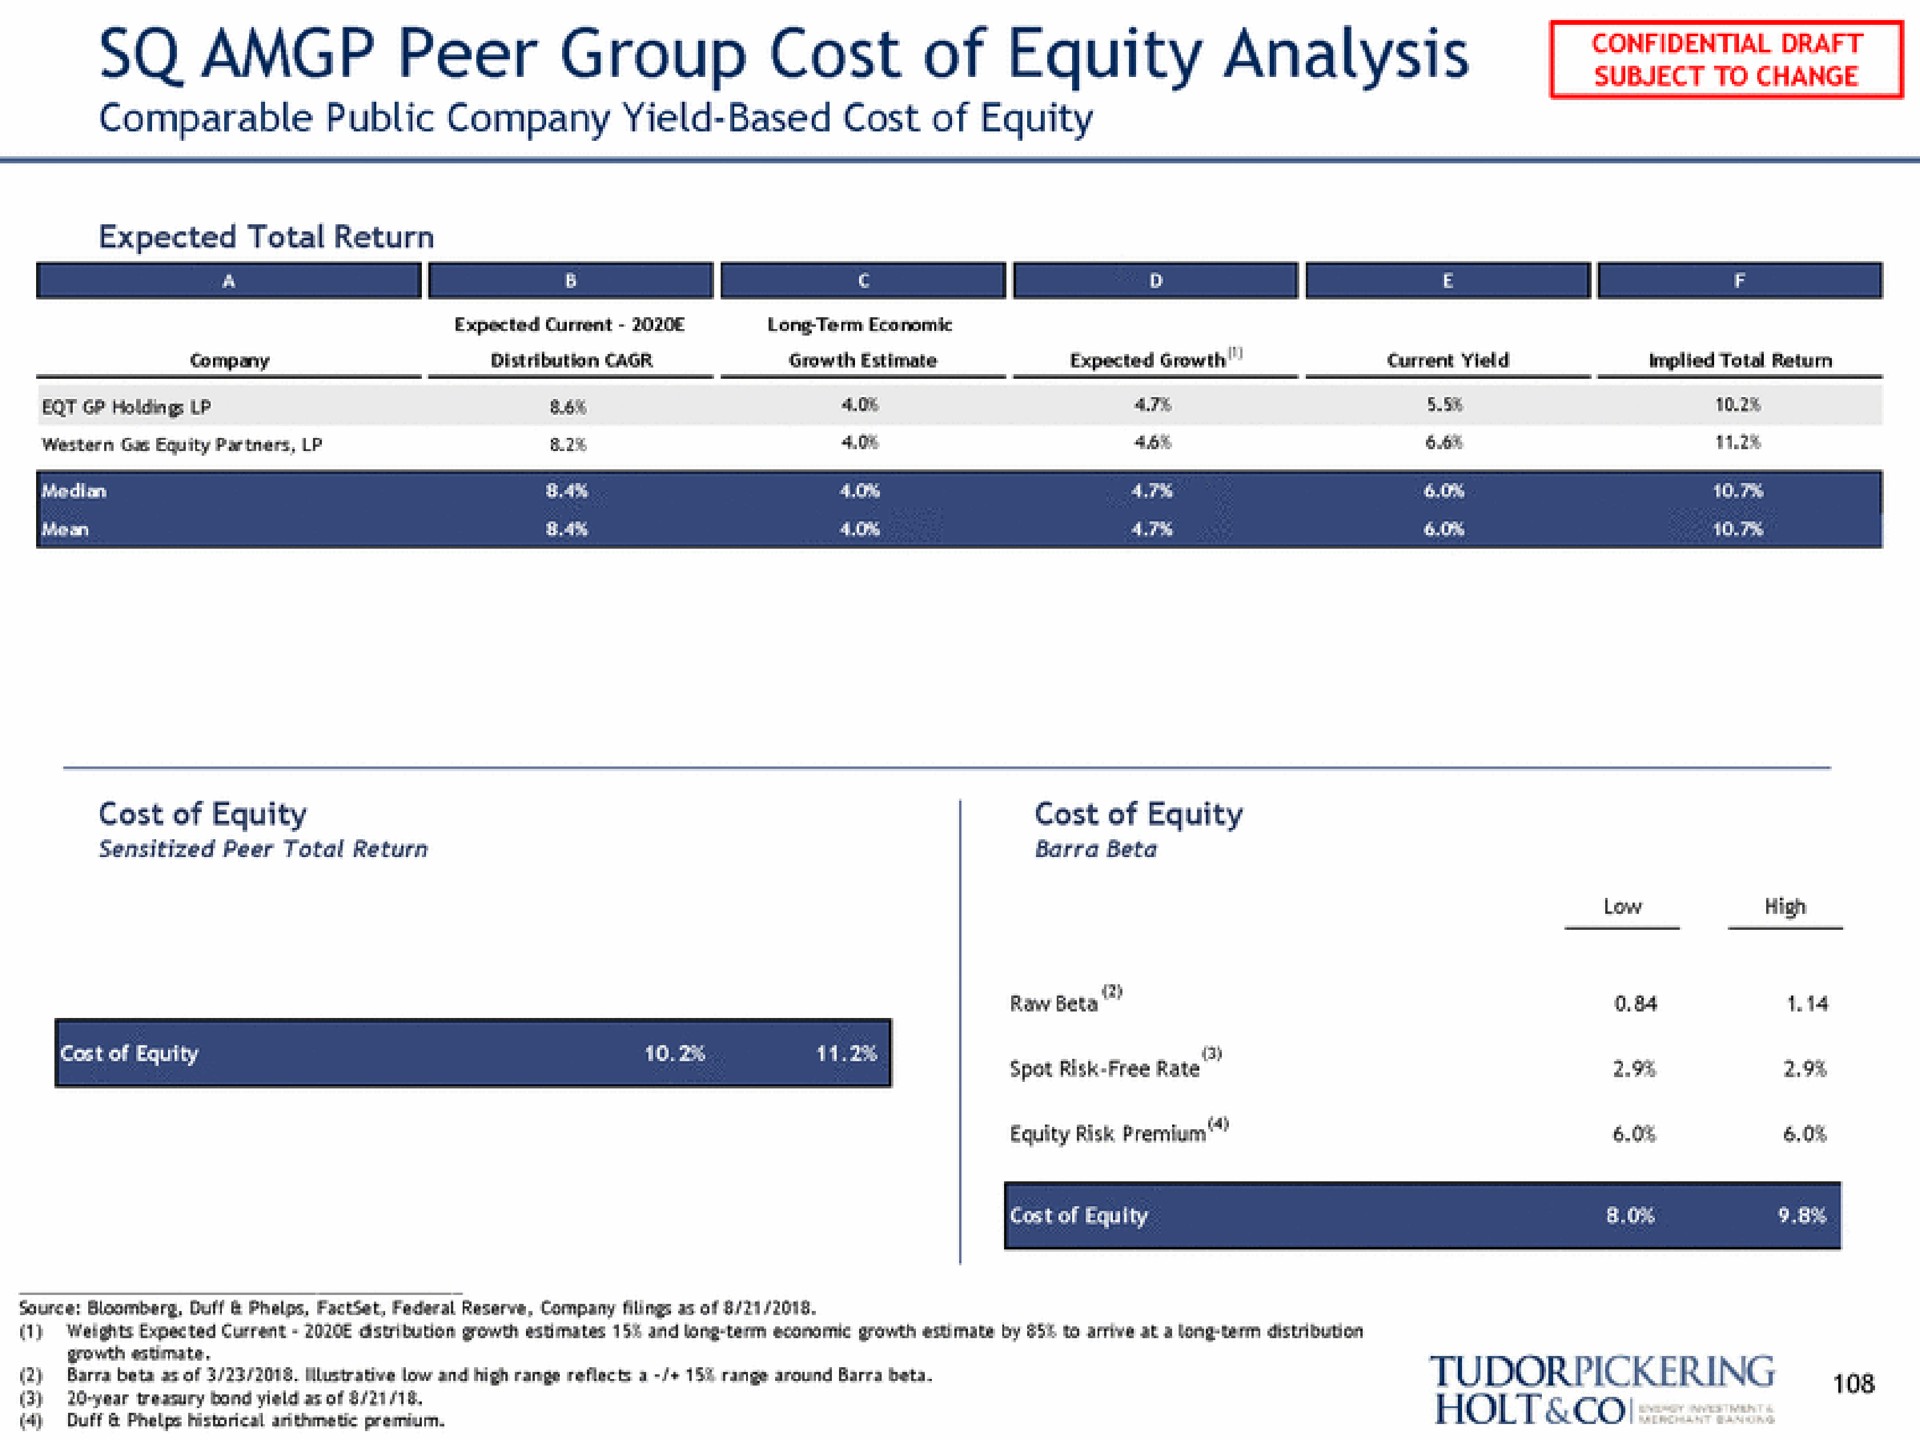 peer group cost of equity analysis | Tudor, Pickering, Holt & Co